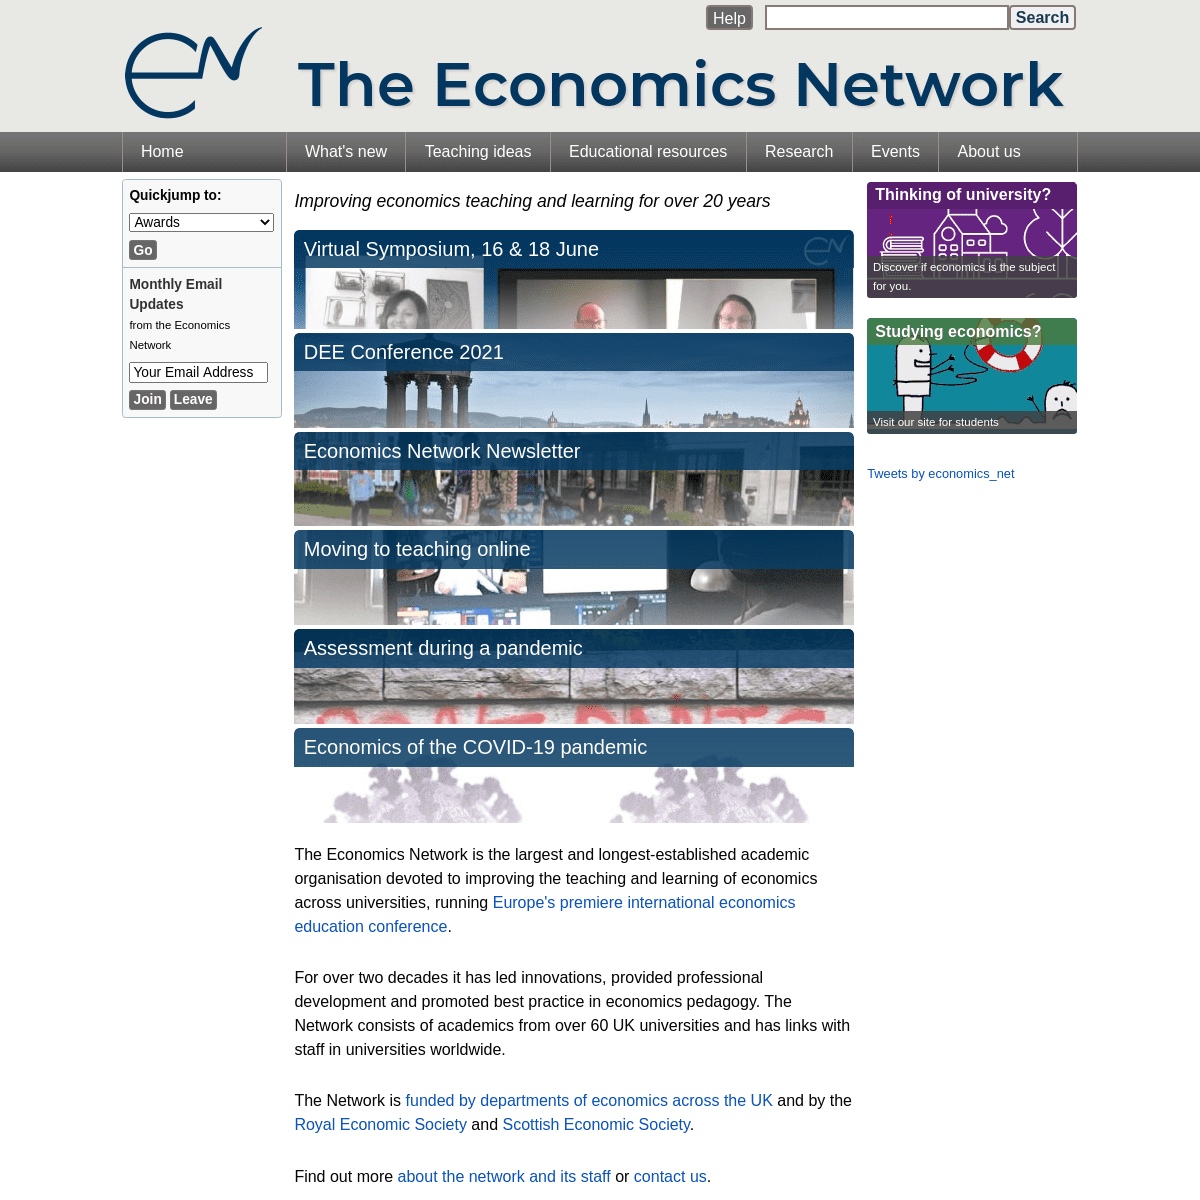 A complete backup of https://economicsnetwork.ac.uk